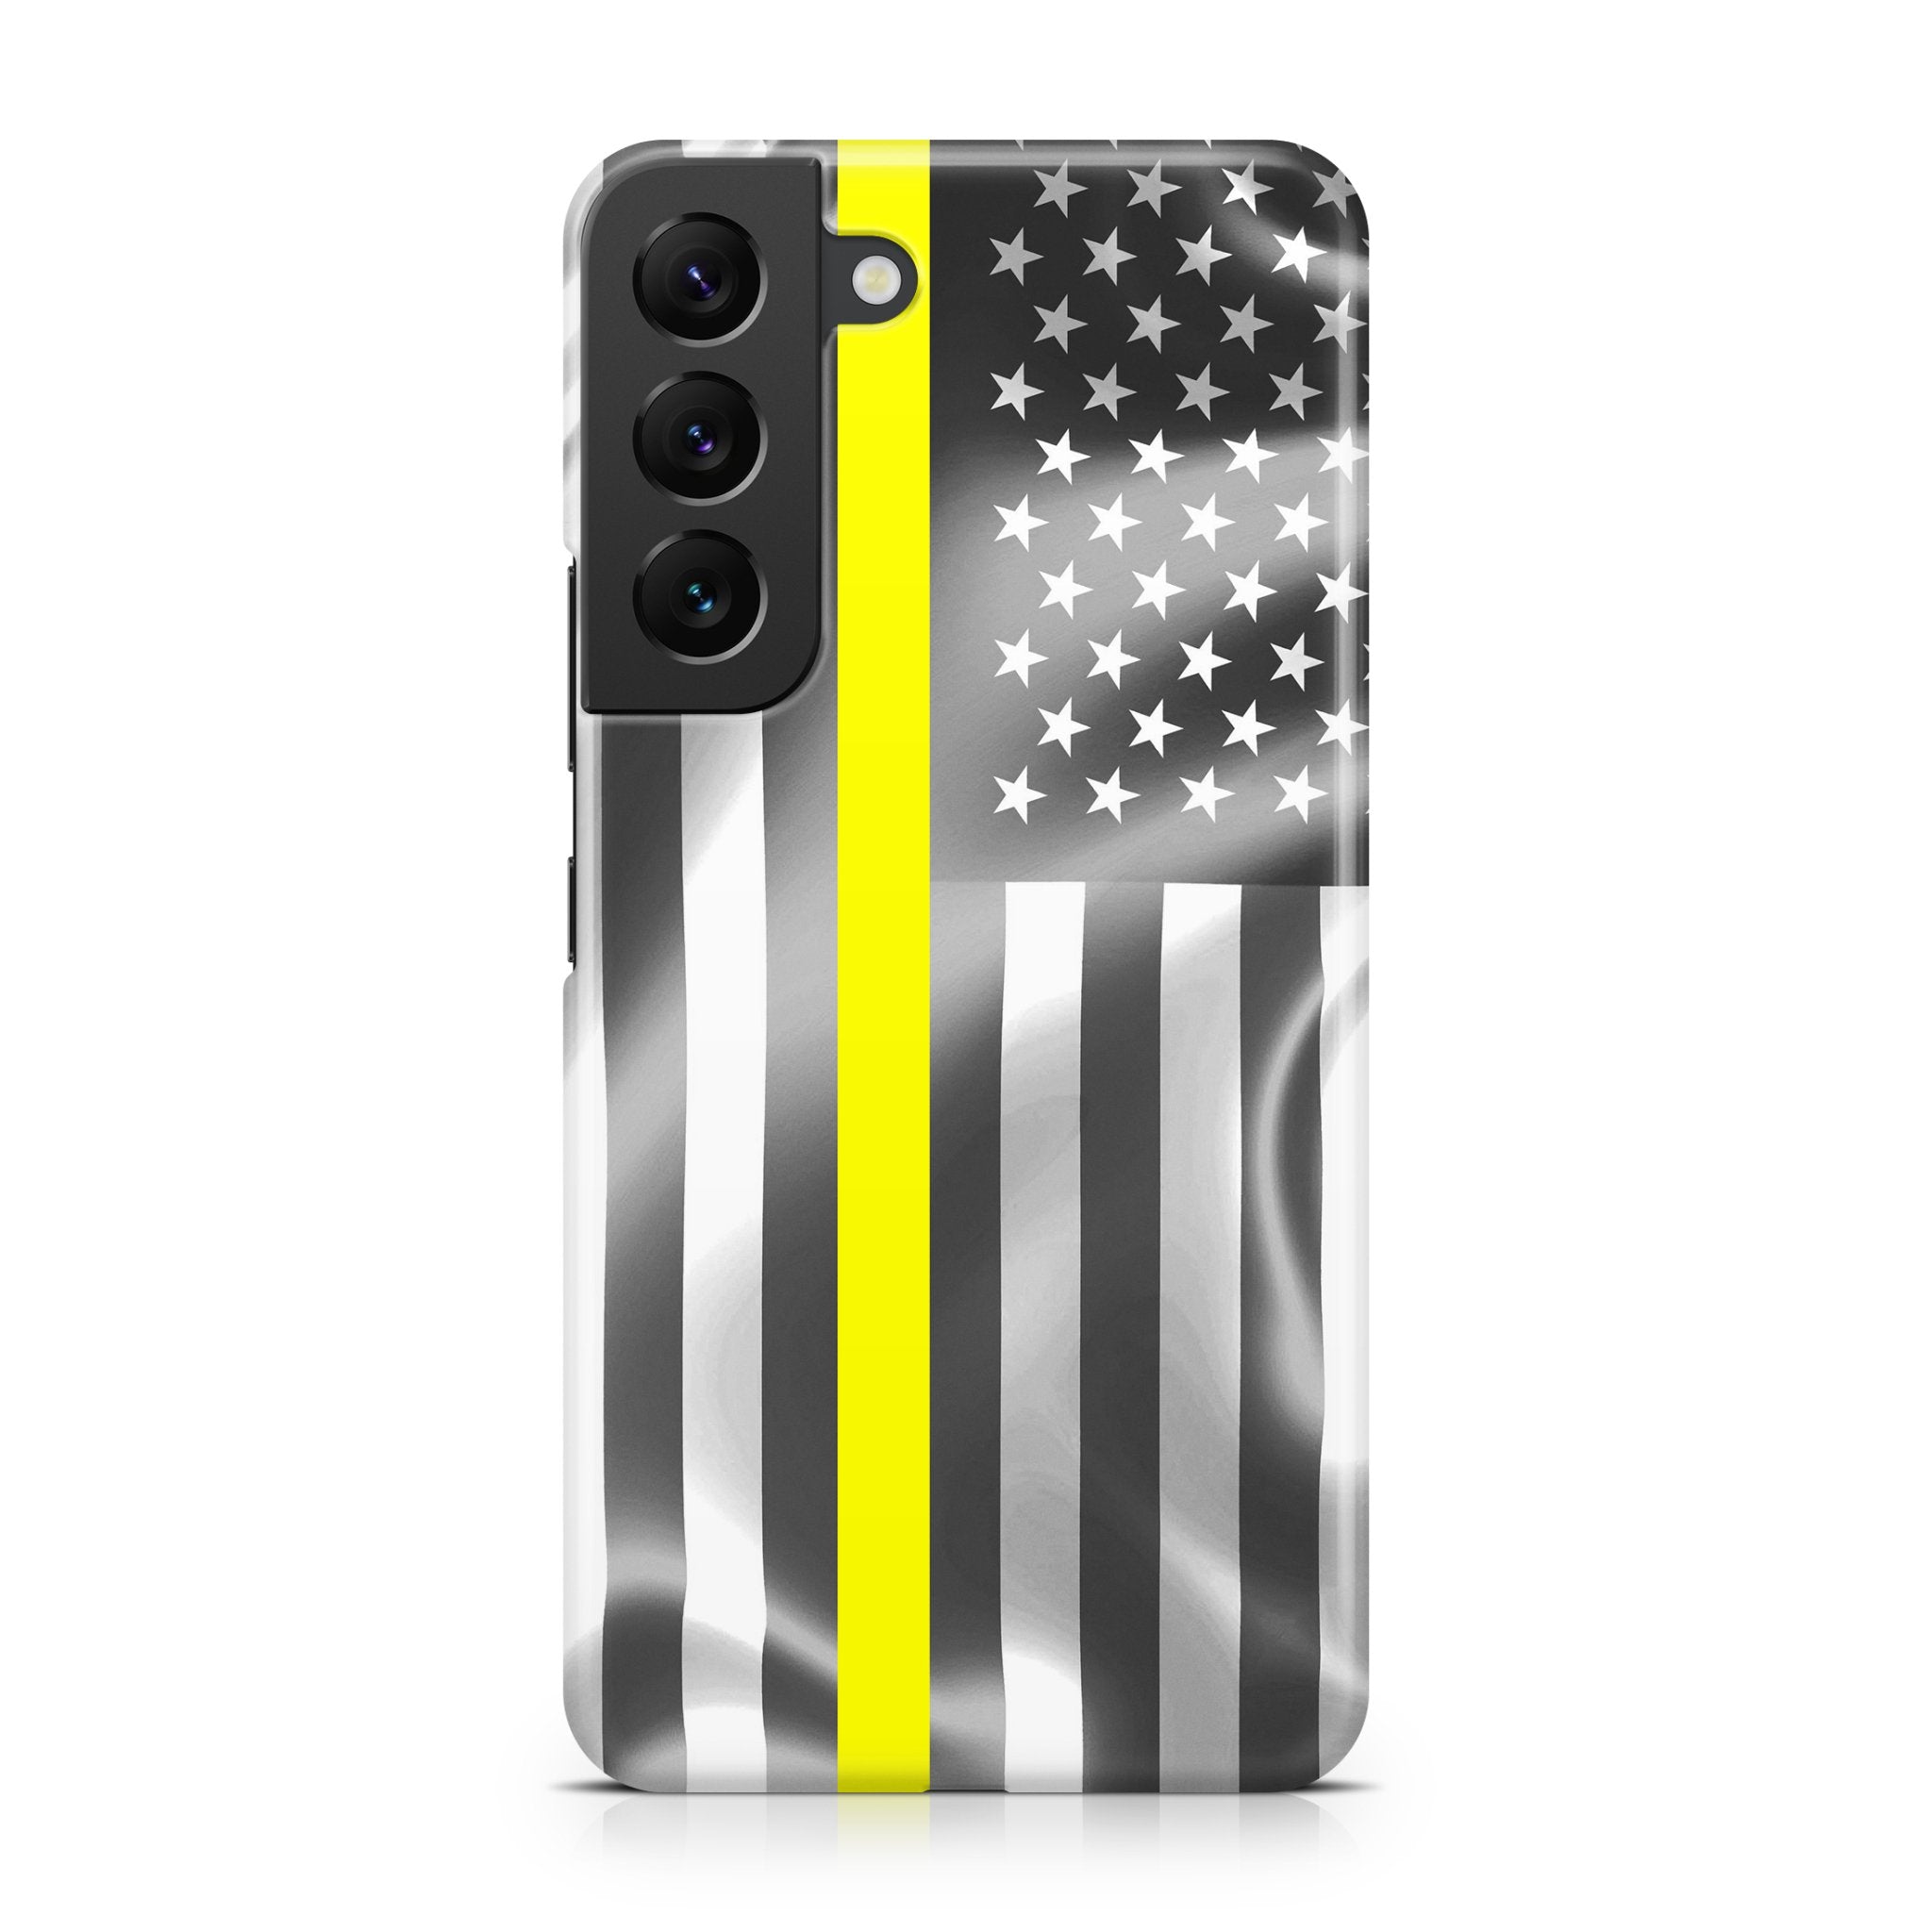 Thin Yellow Line - Samsung phone case designs by CaseSwagger